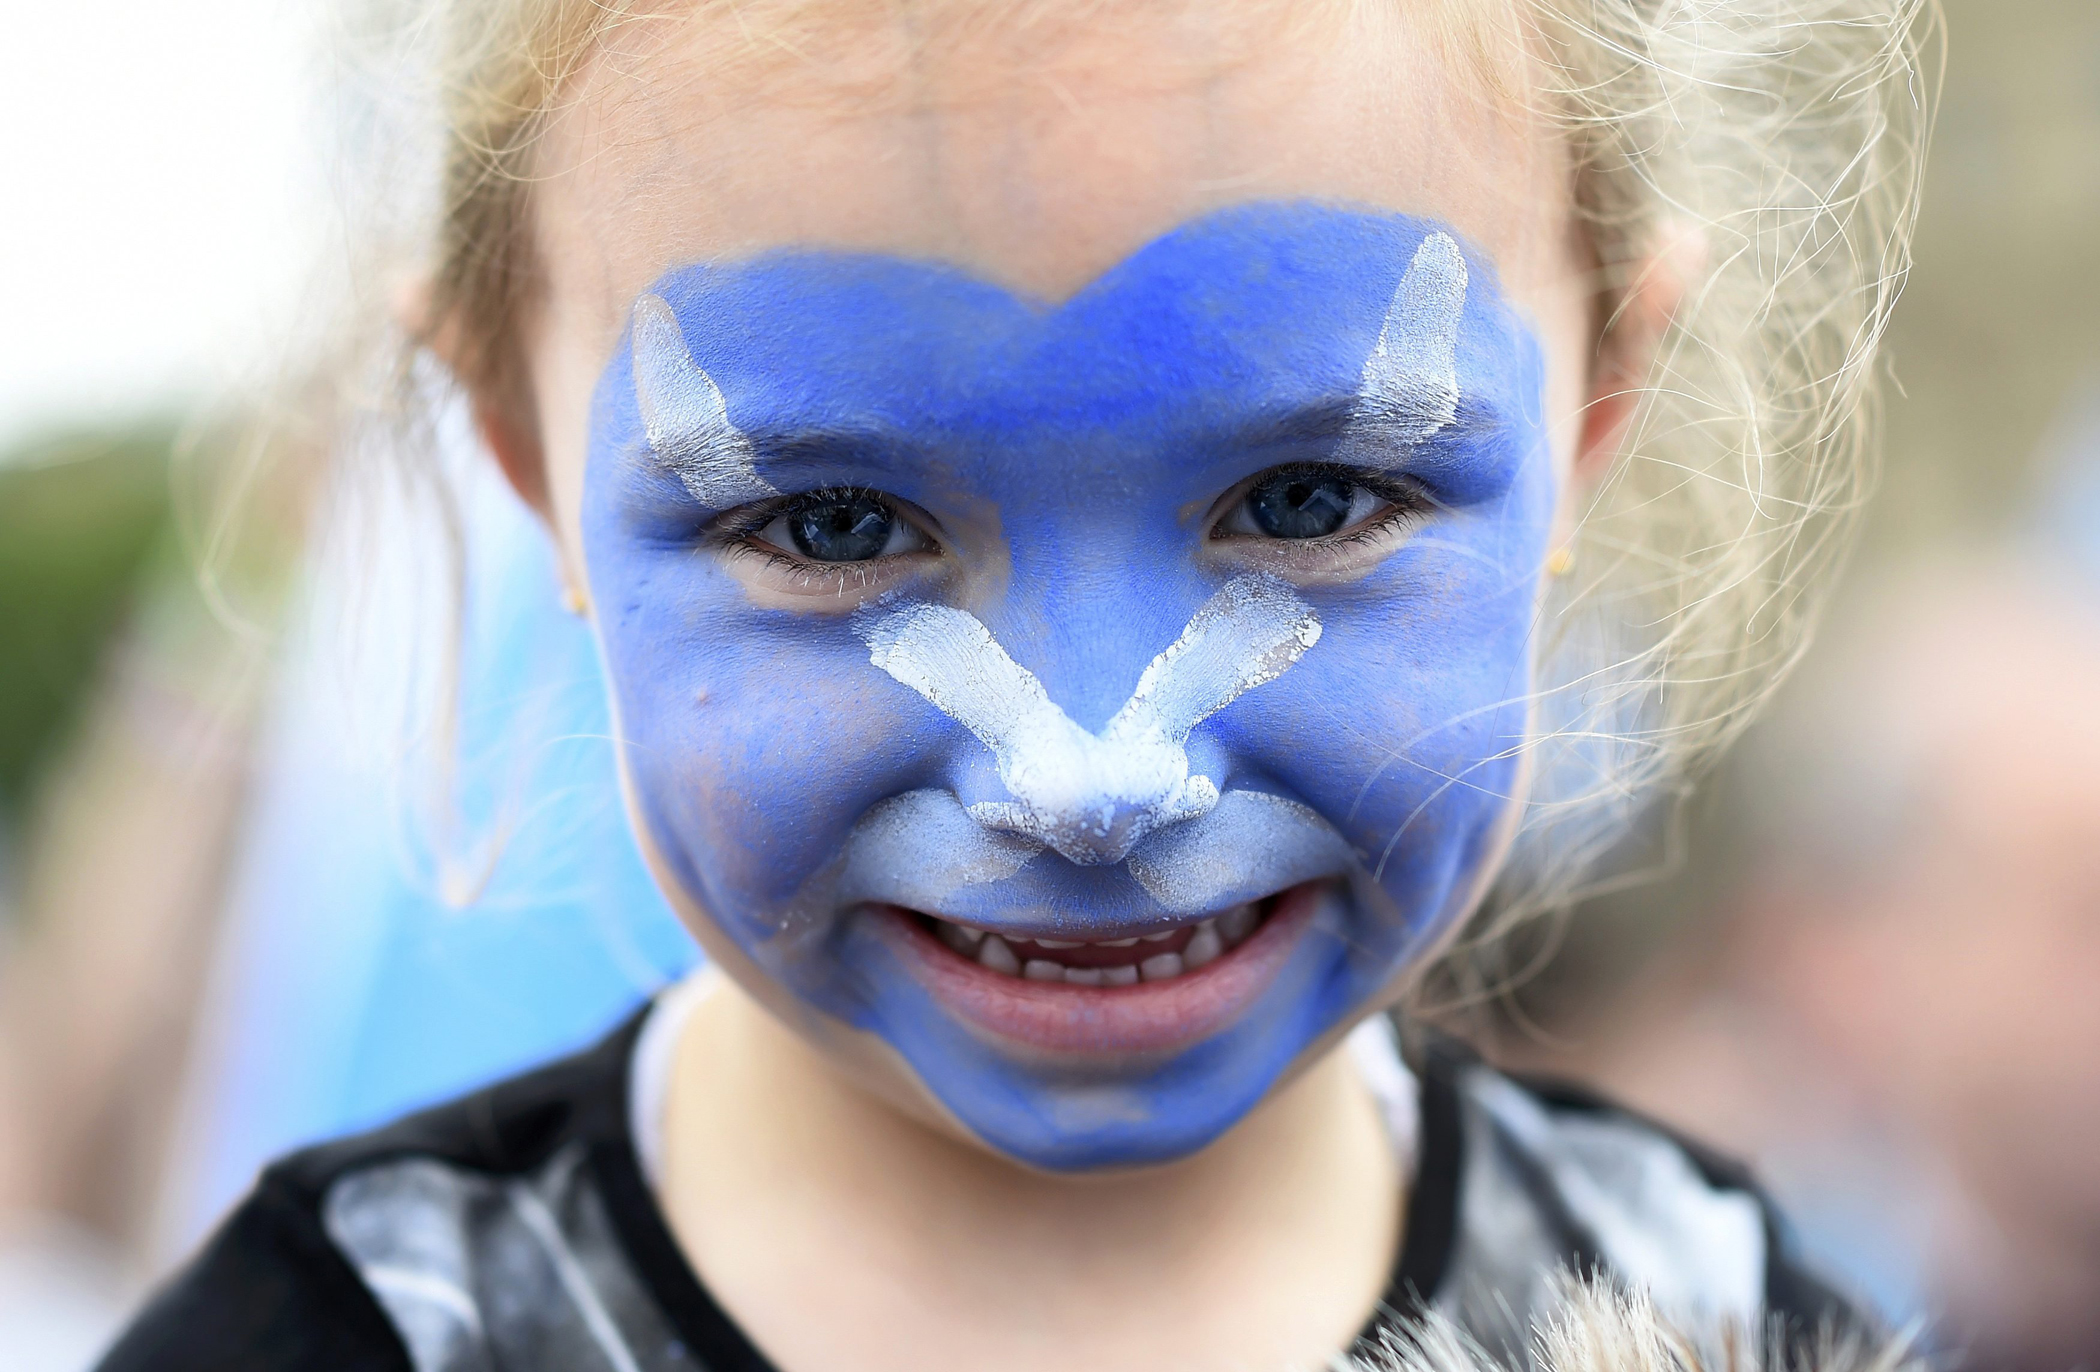 A young girl with a Scottish Saltire painted on her face waits outside a 'Yes' campaign rally in Glasgow, Scotland, Sept. 17, 2014.